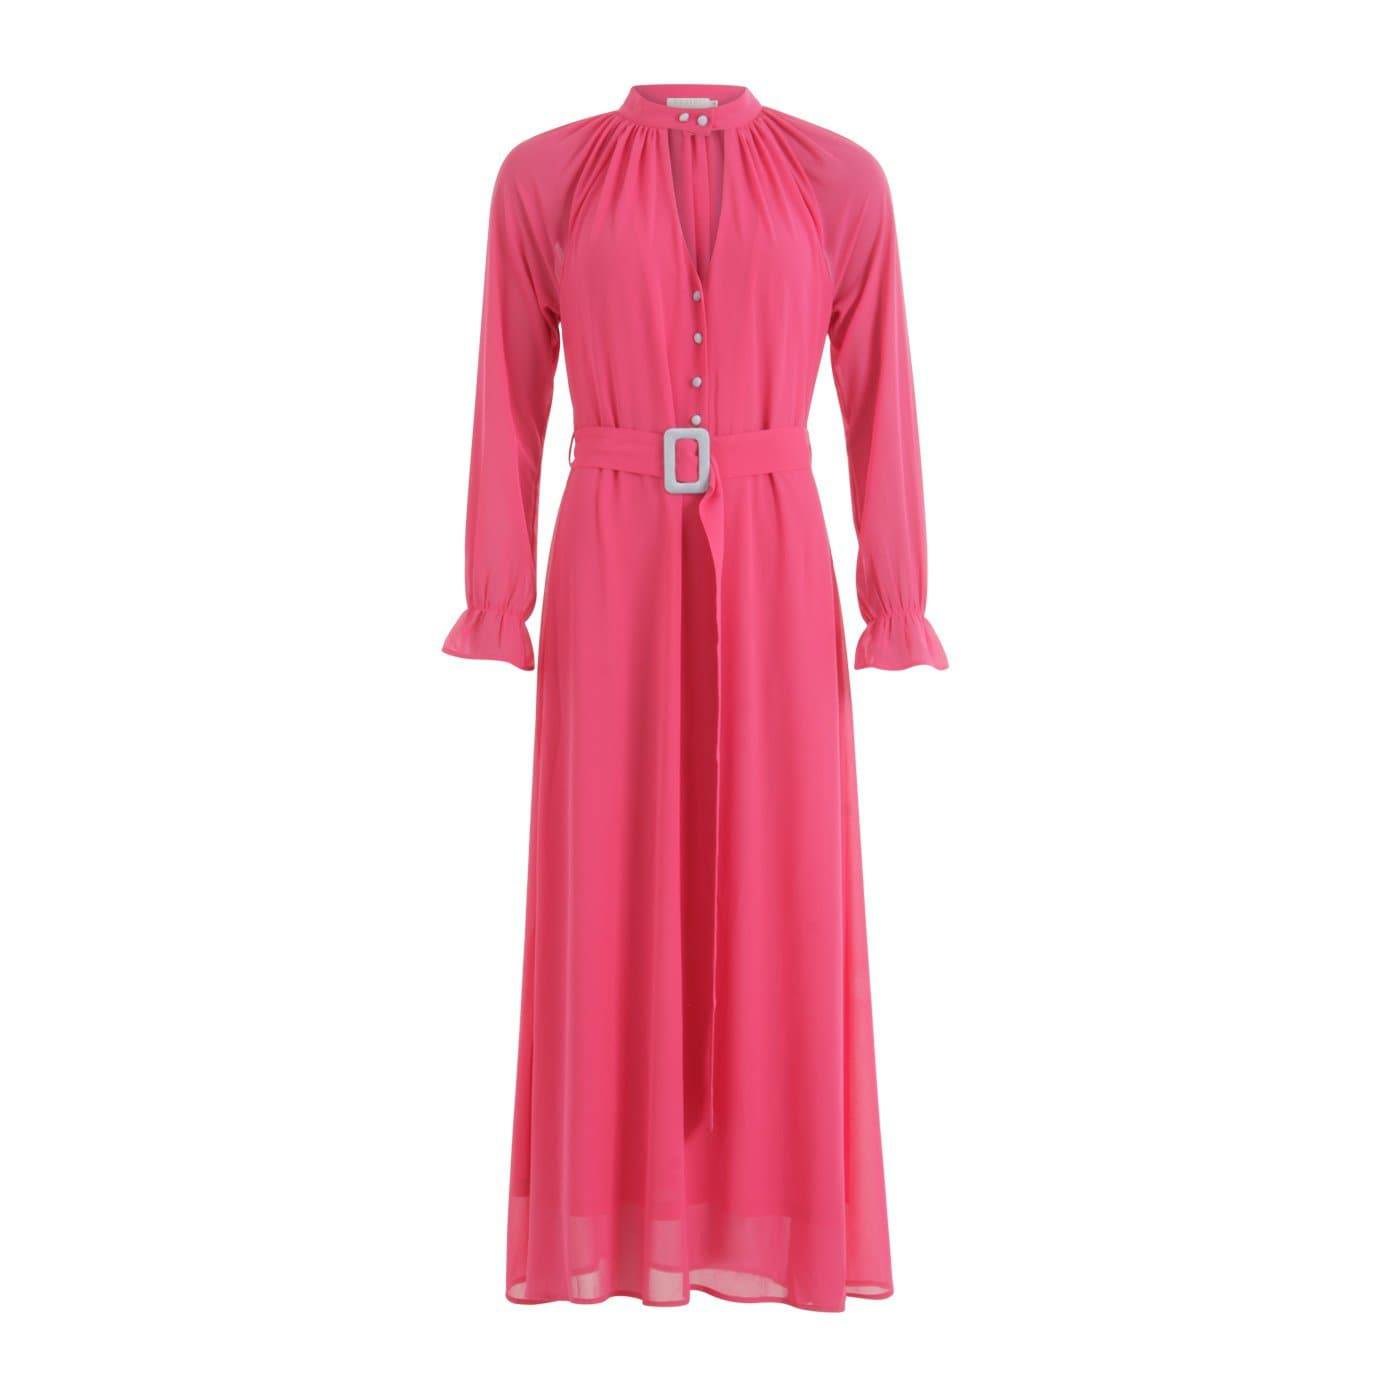 Coster Copenhagen Long Pink Dress with Buckle Closure - Your Style Your Story